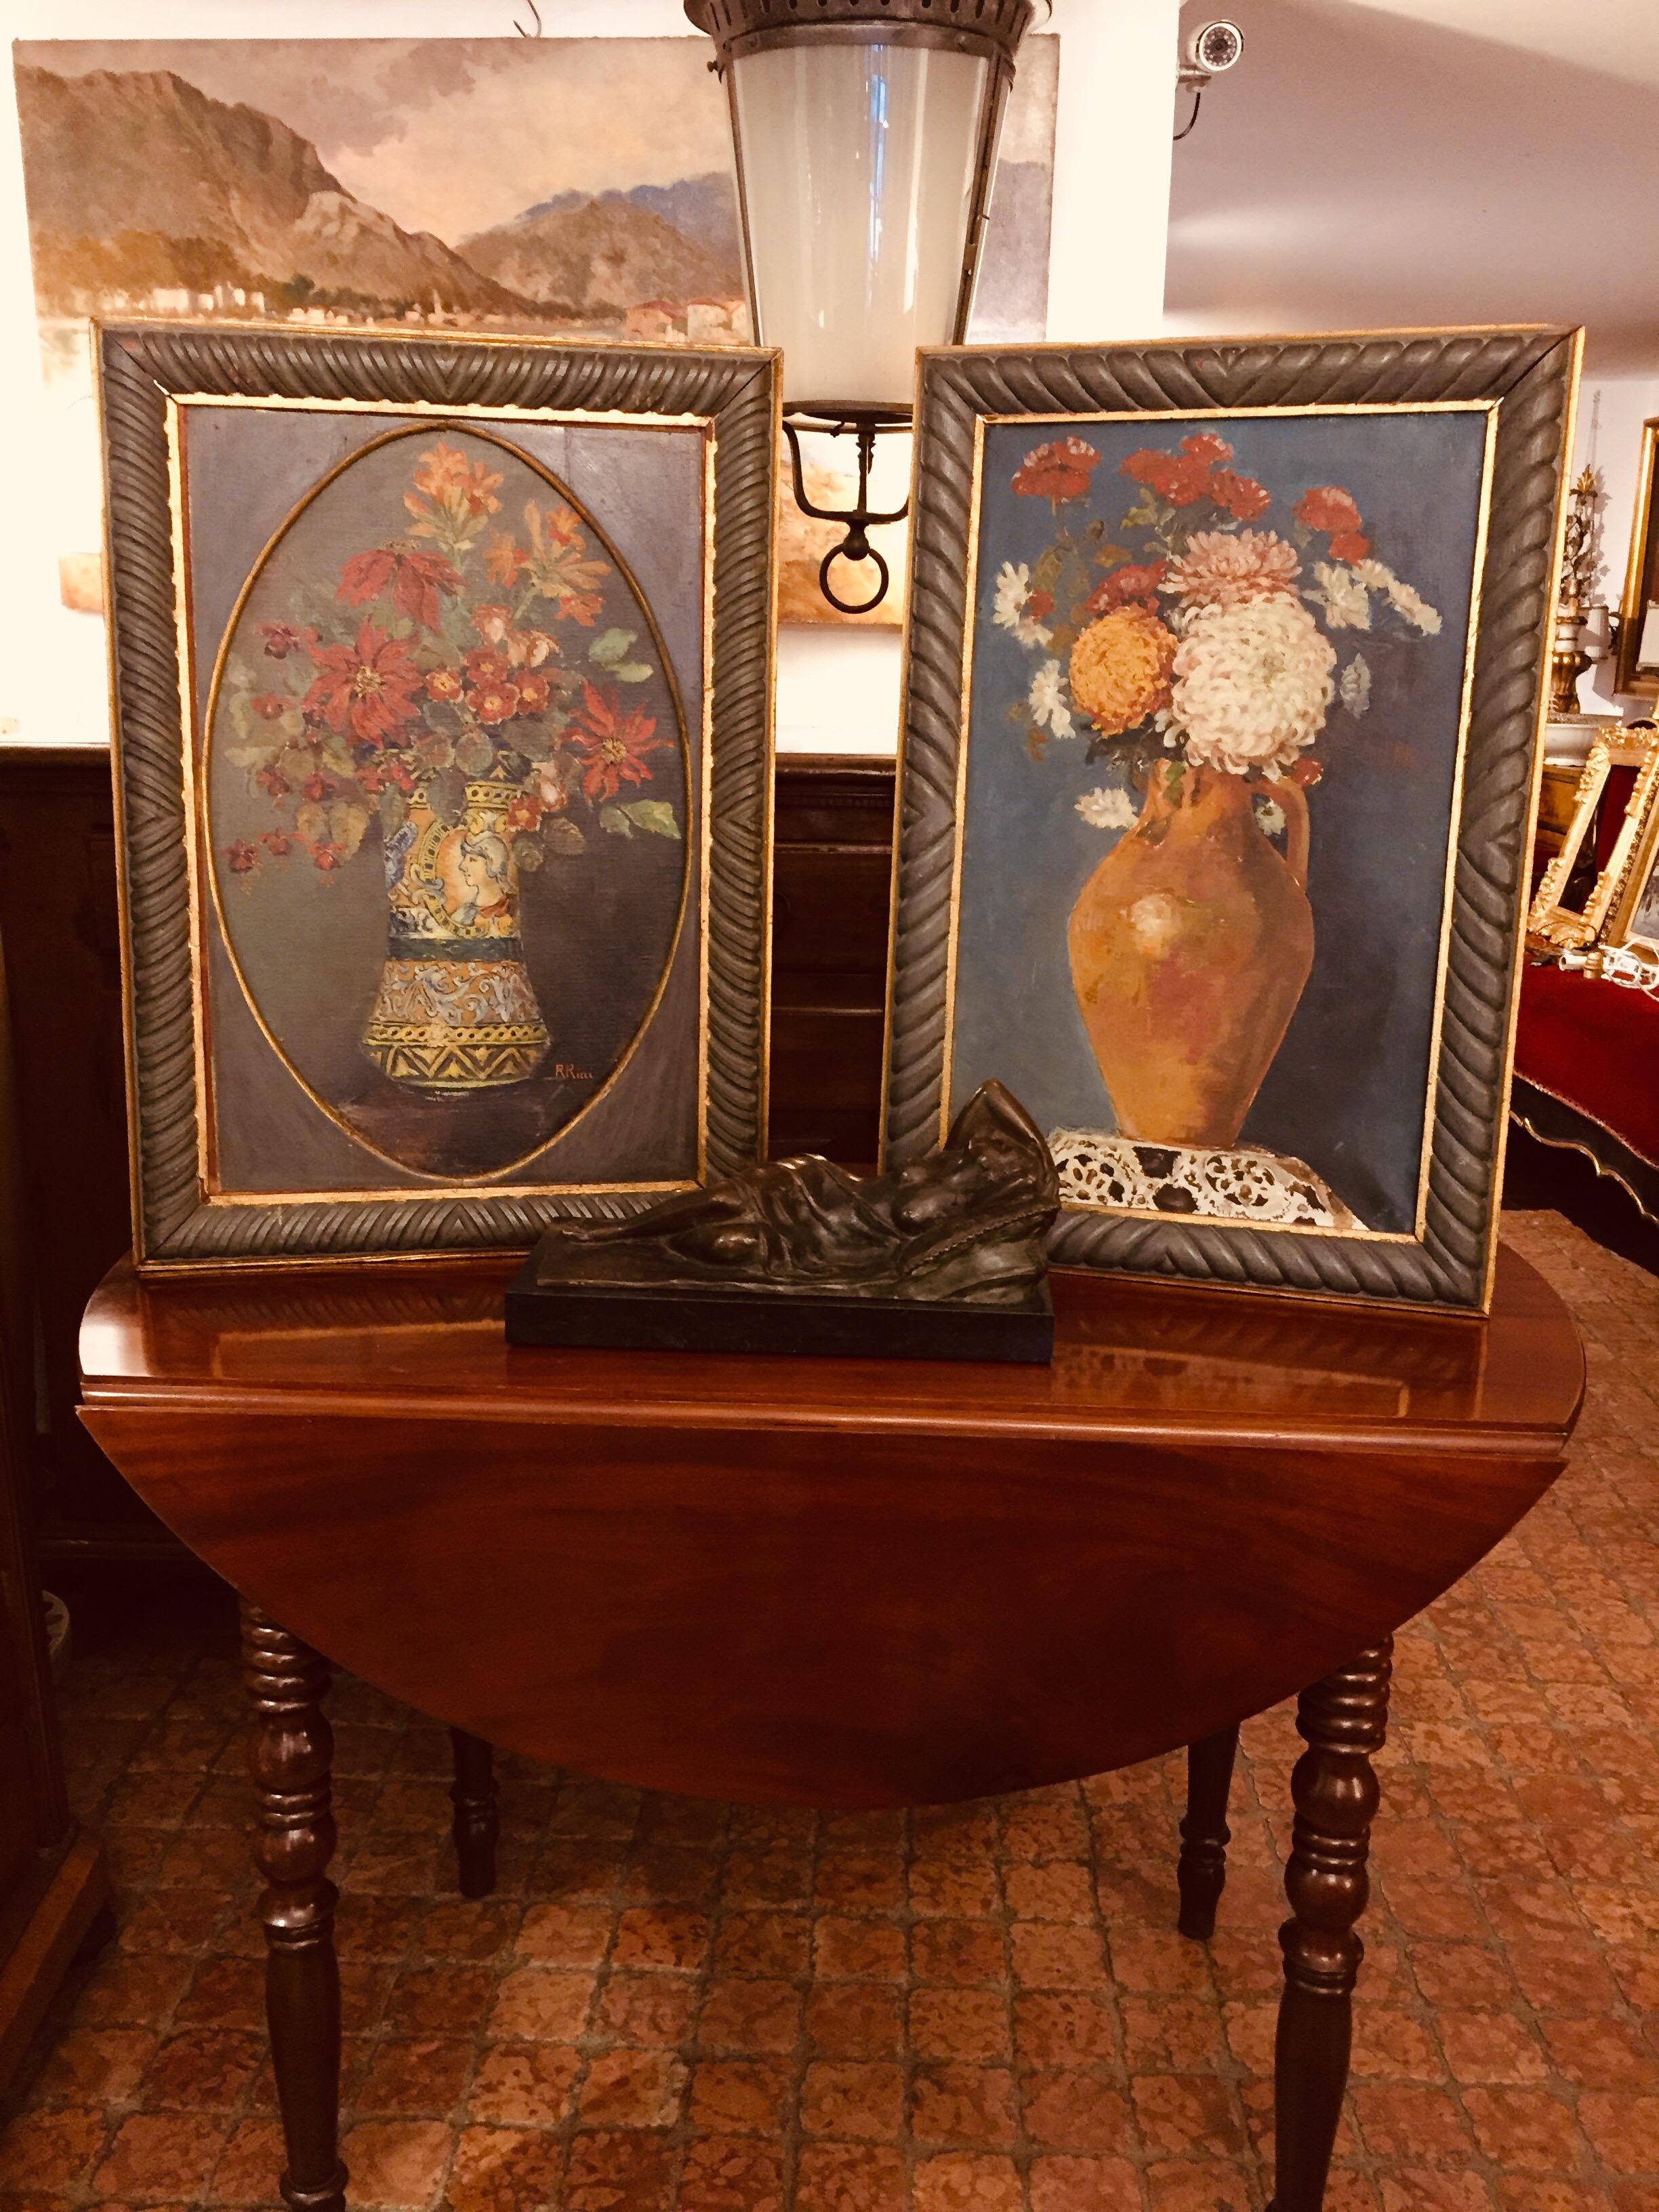 Pair of Italian Flower Still life Paintings by Ricci 20th Century Green Frames For Sale 7